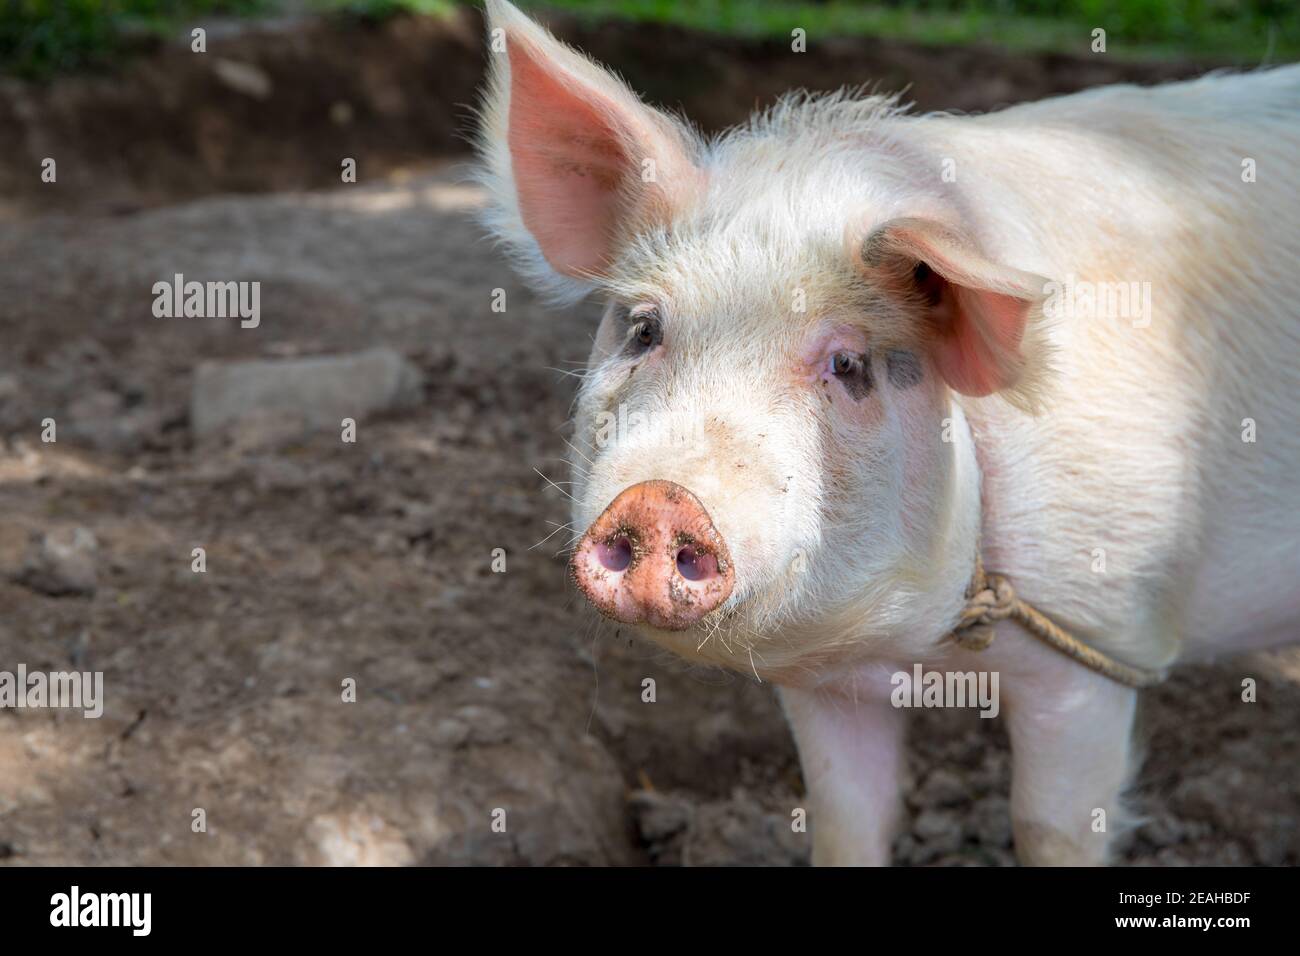 White pig on outdoor pasture of farm. Ethical animal farming. Outdoor pasture for a piglet. Pink piglet closeup with soft eat and snout. Pig as farm a Stock Photo